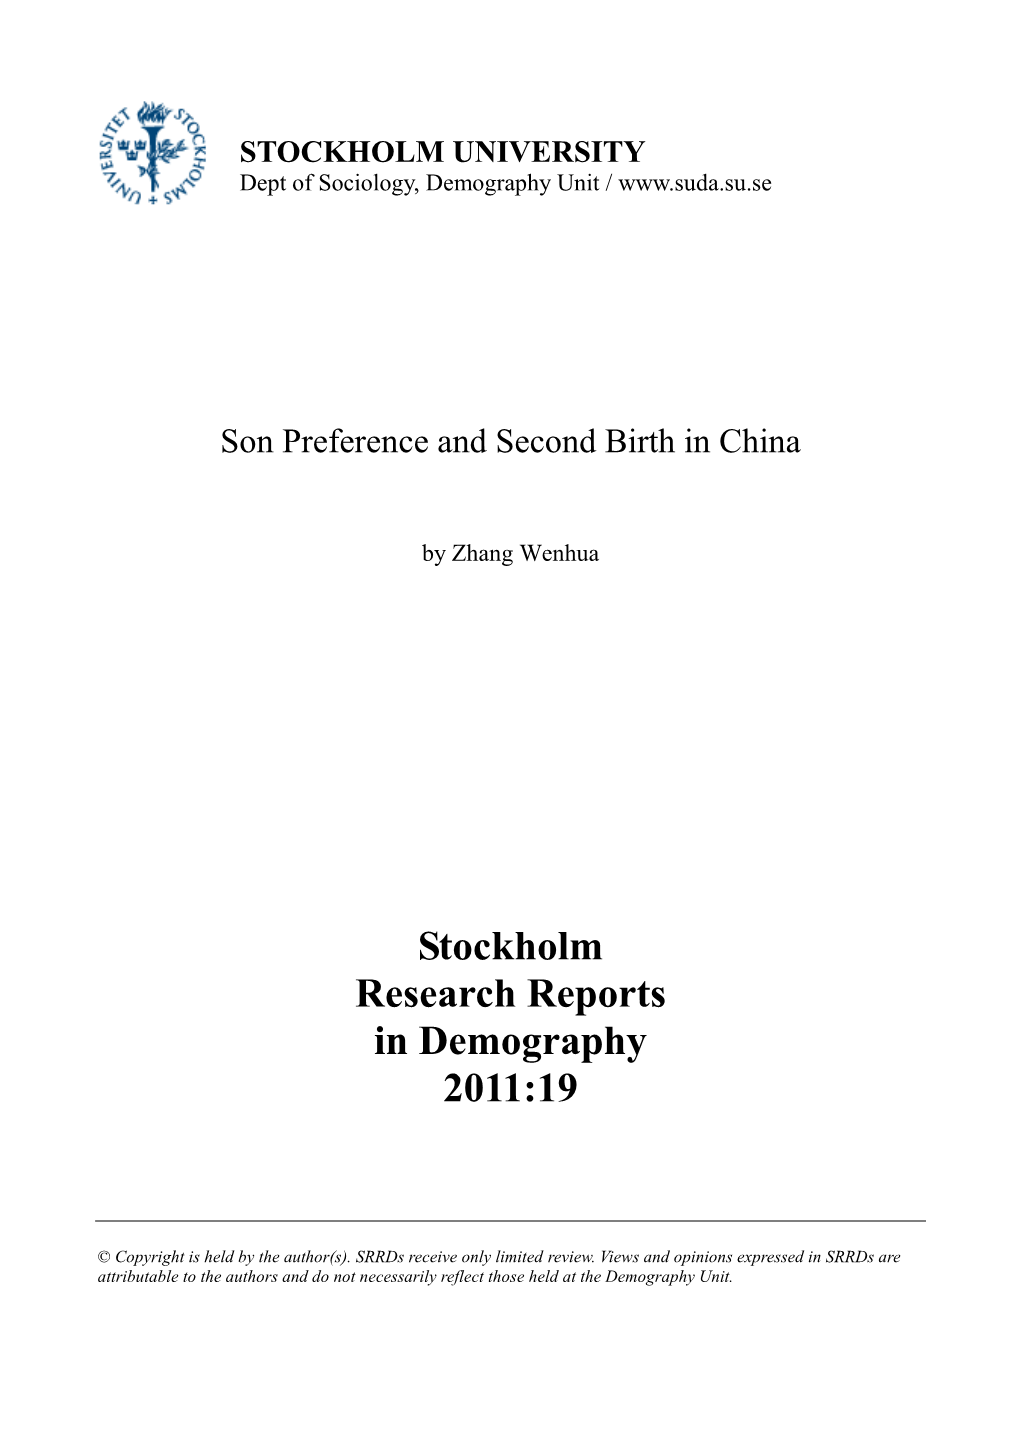 Son Preference and Second Birth in China